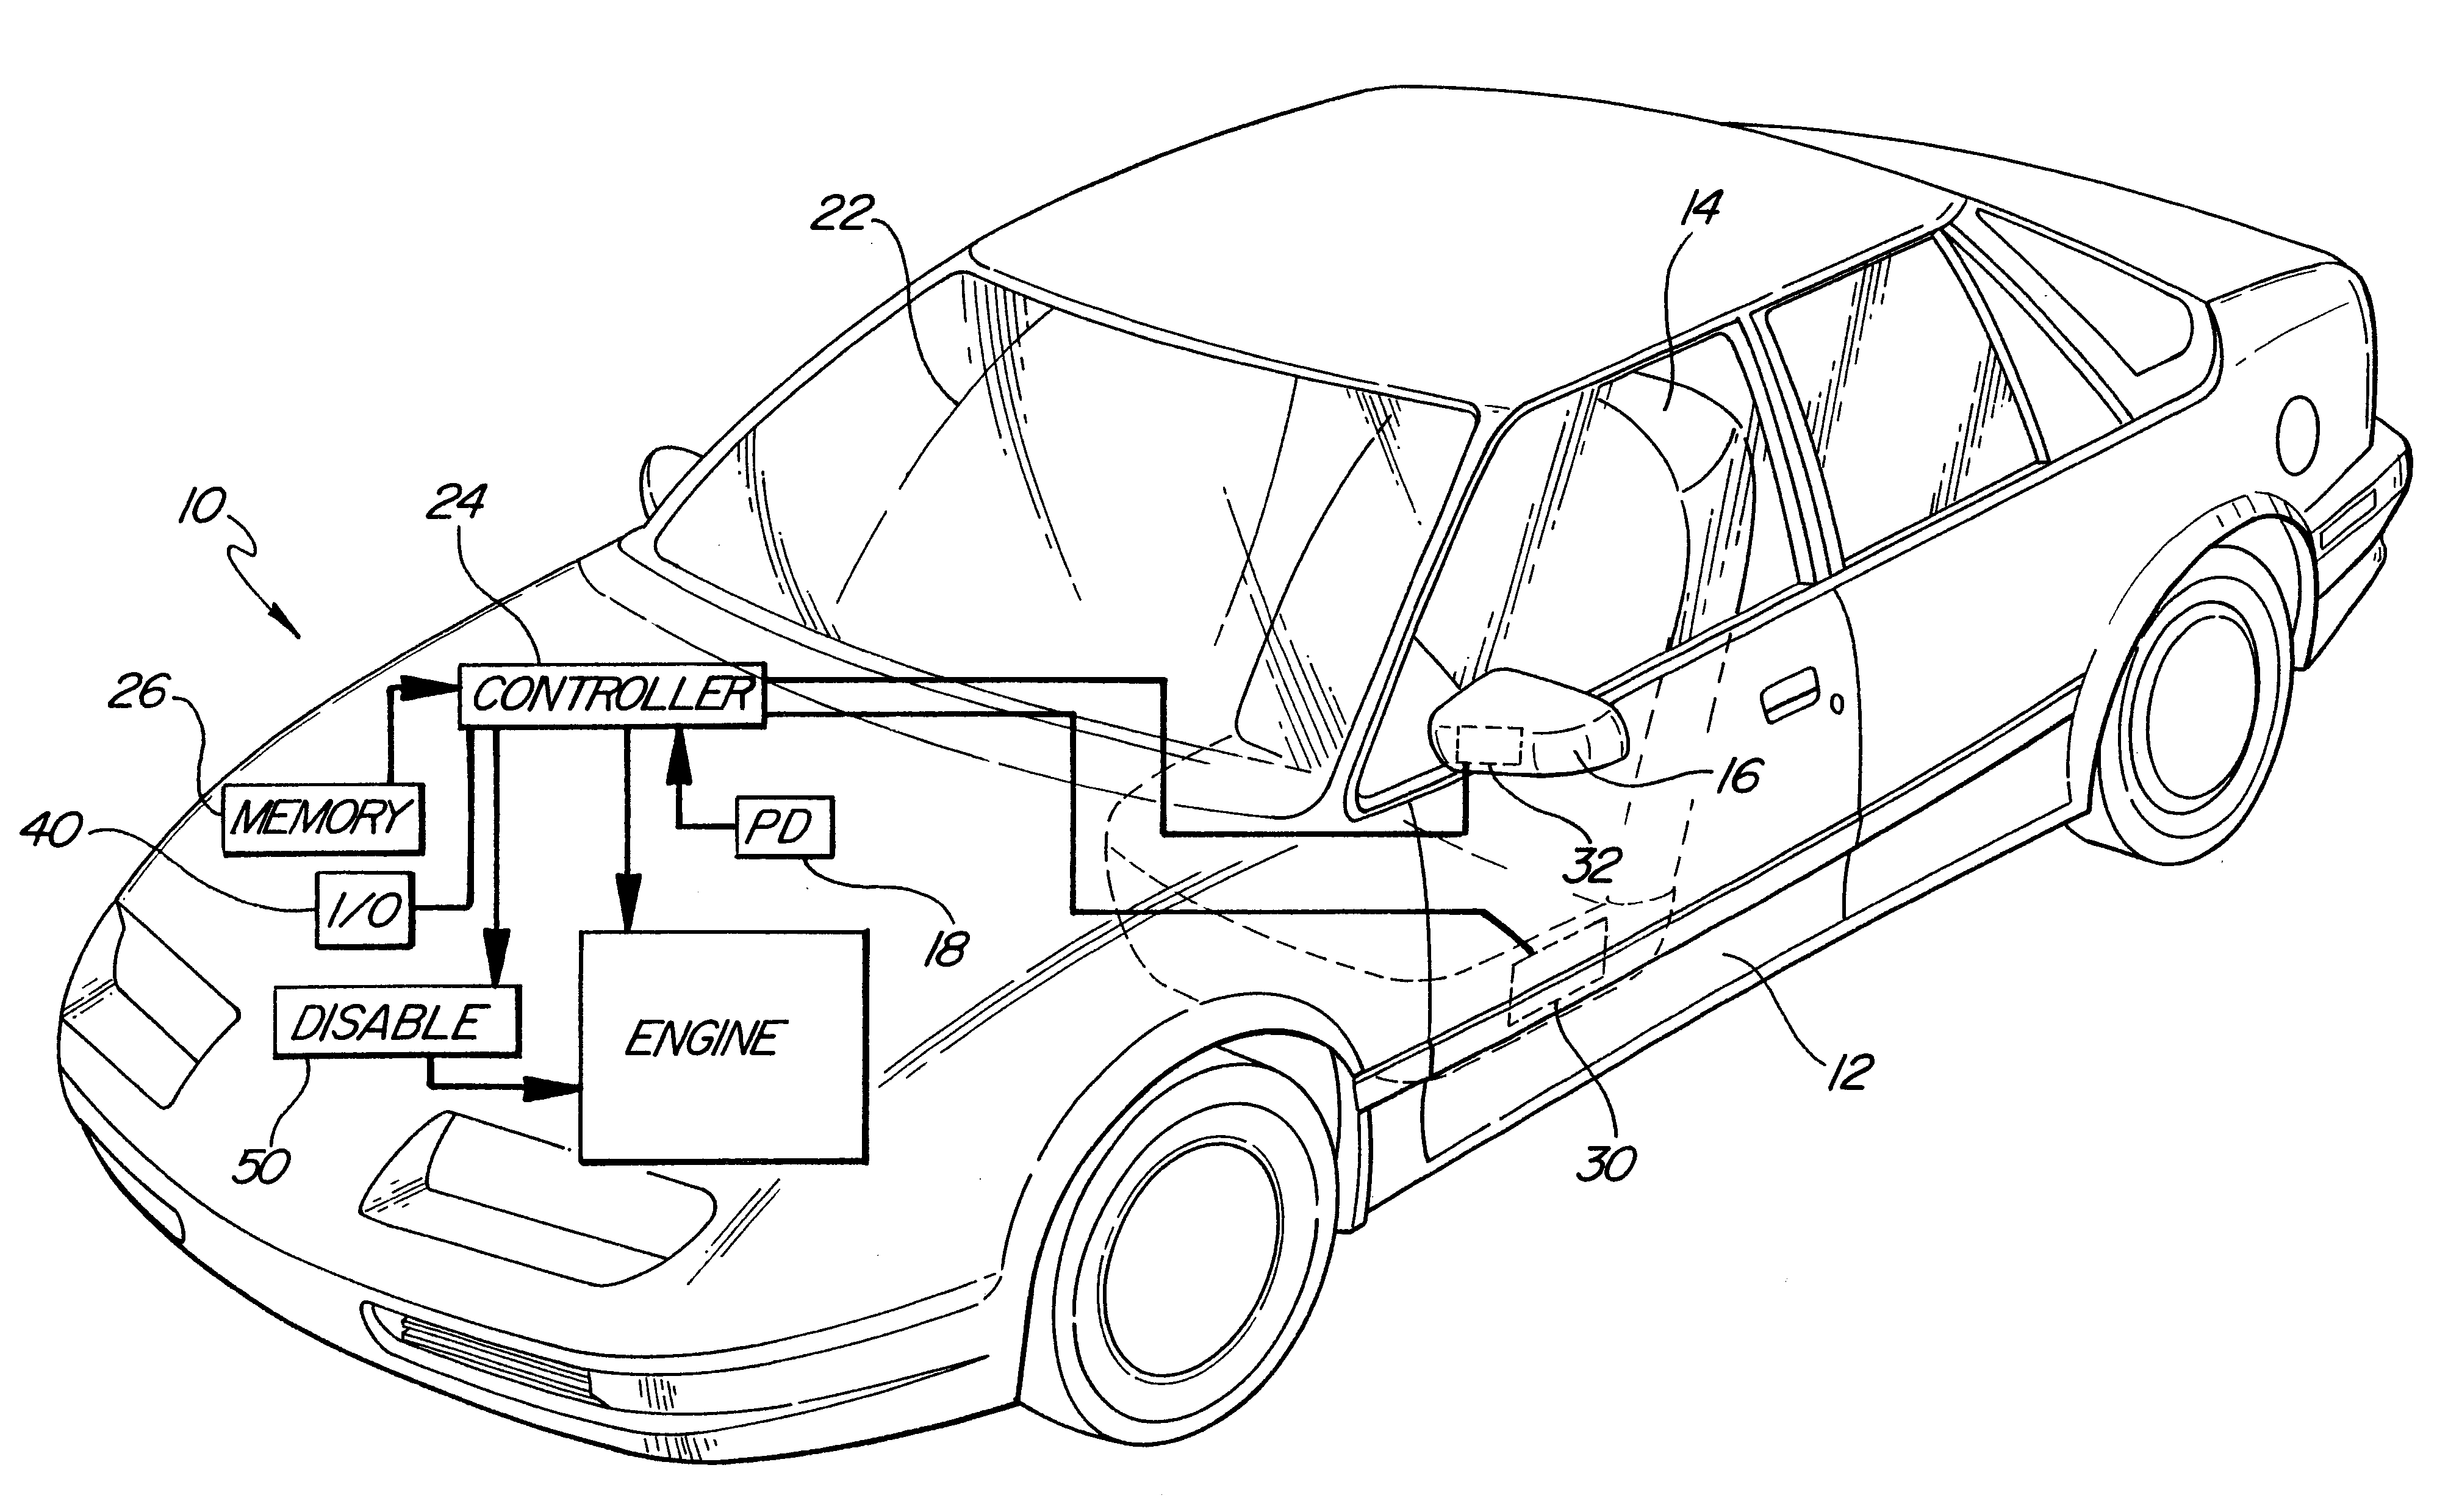 System for automatically adjustable devices in an automotive vehicle